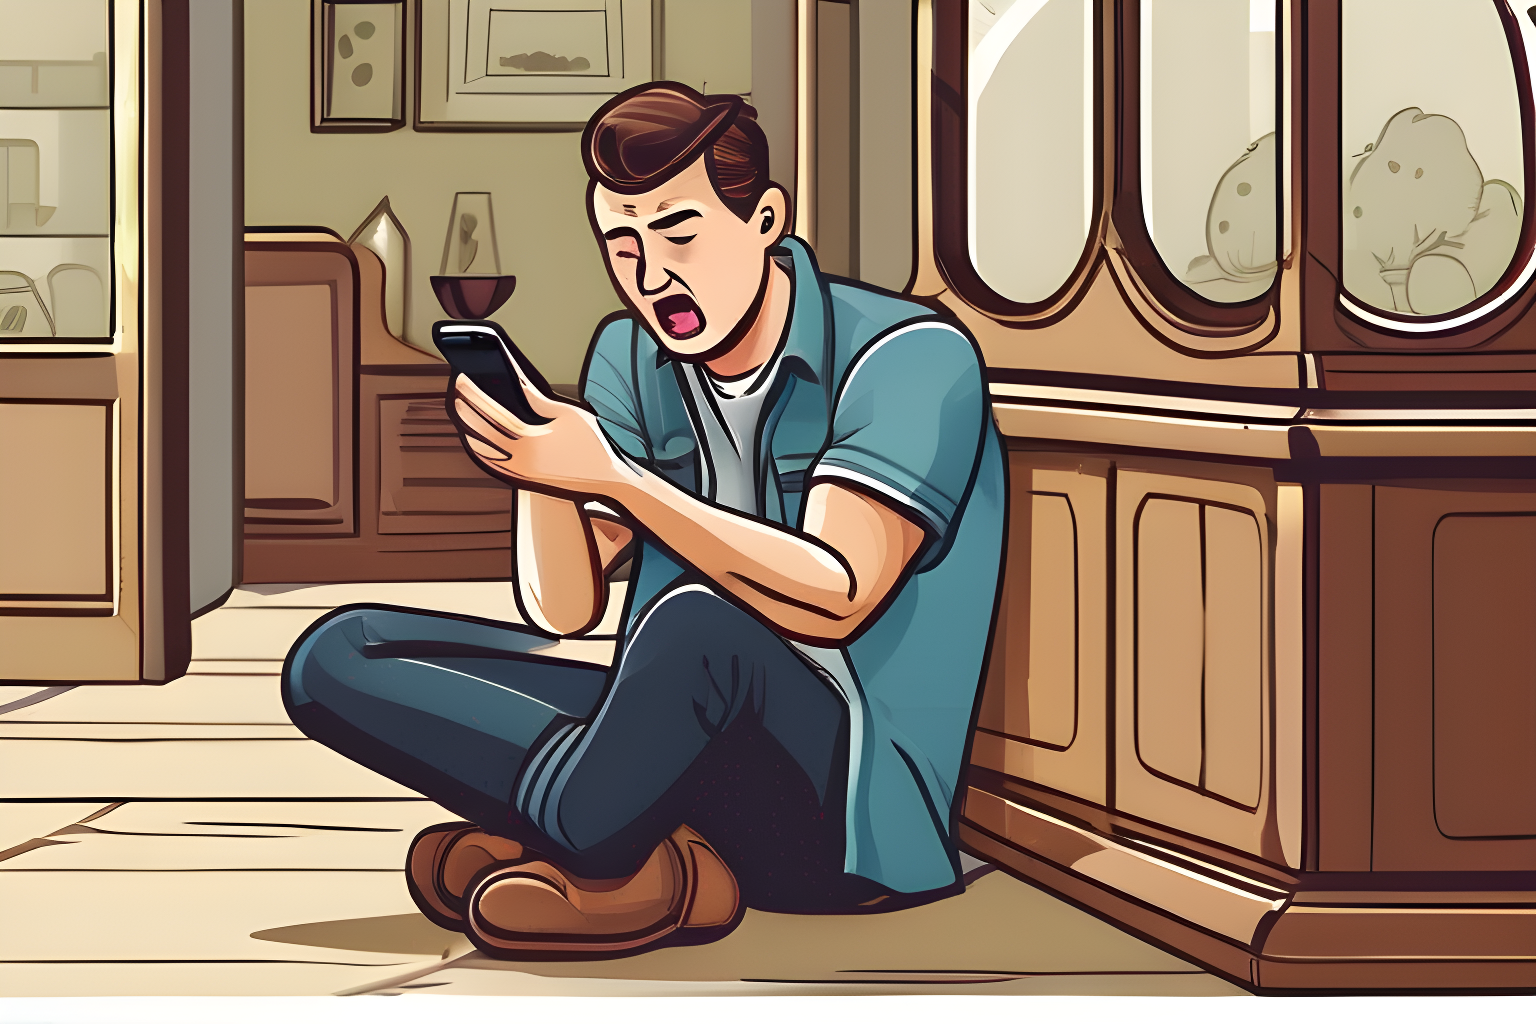 Young man crying and staring at a smartphone. award-winning, professional, highly detailed